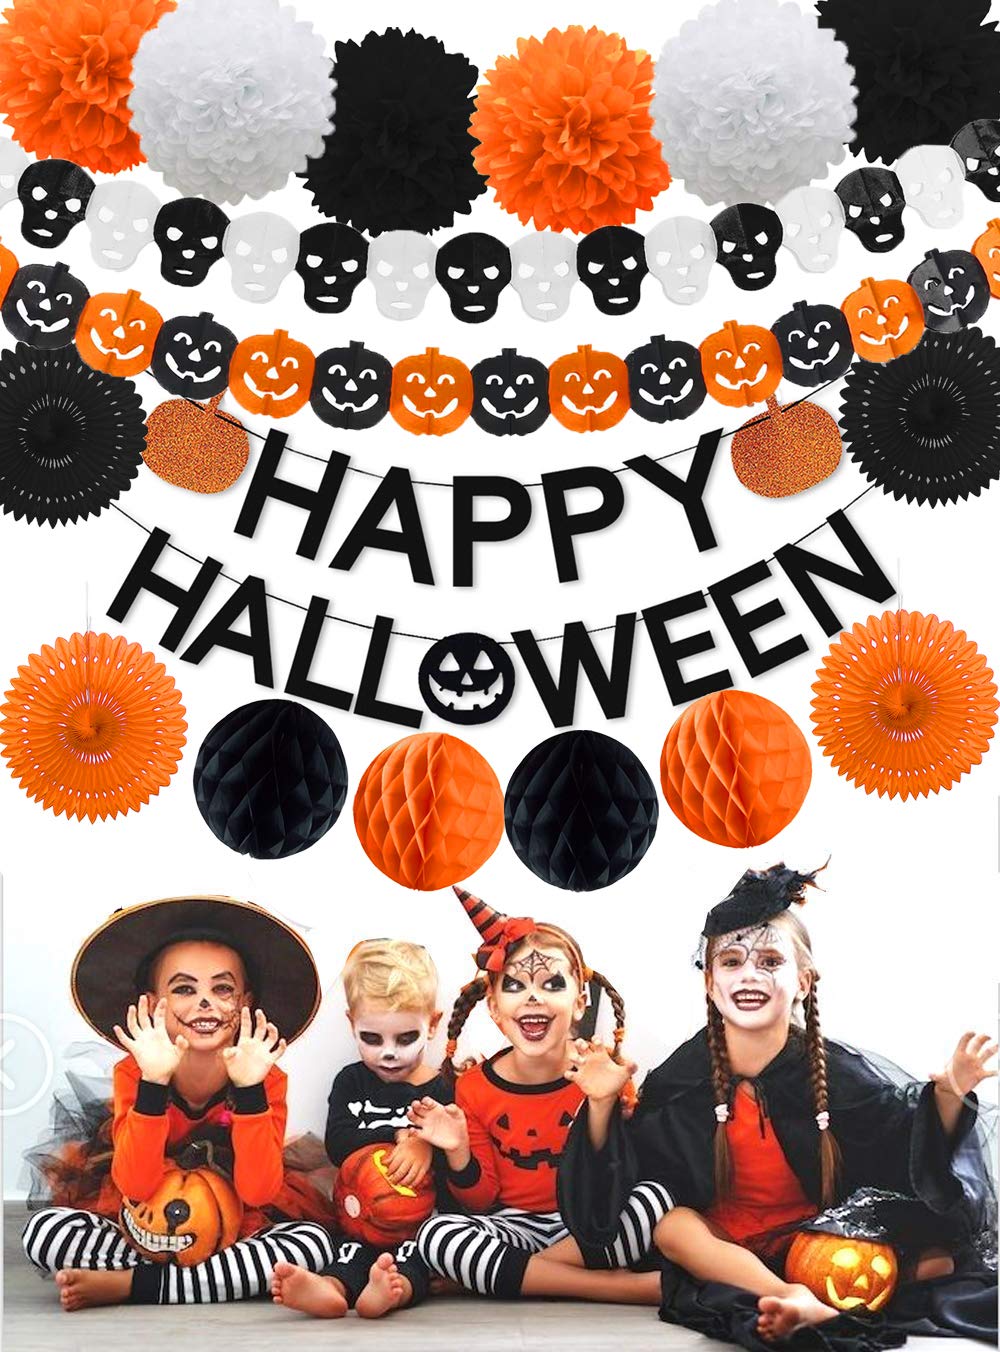 Halloween Party Decorations,Black Glittery Happy Halloween Orange Pumpkin Banner All-in-One Pack for Halloween Theme Party Supplies Decorations Kit for Kids